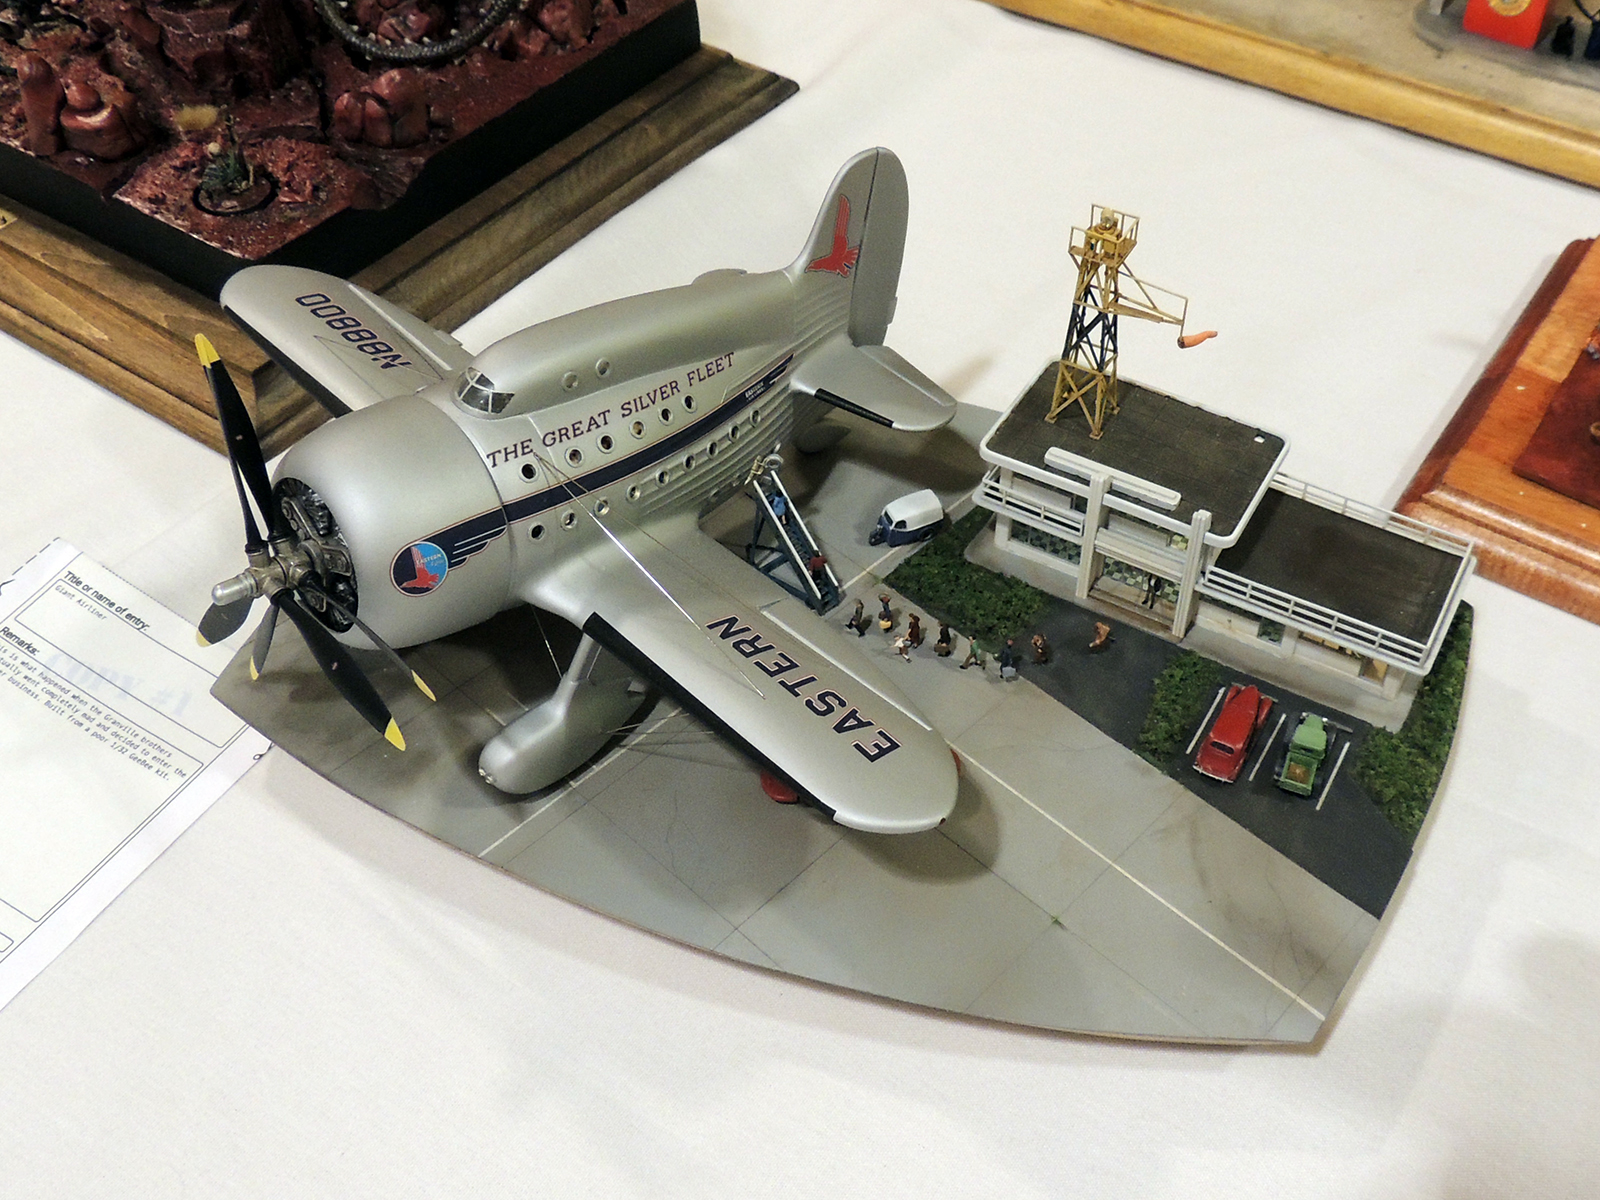 Steve Hilby's 'Giant Airliner' based on a really crappy 1/32 GeeBee racer also won a well-deserved Gold- (click to close)